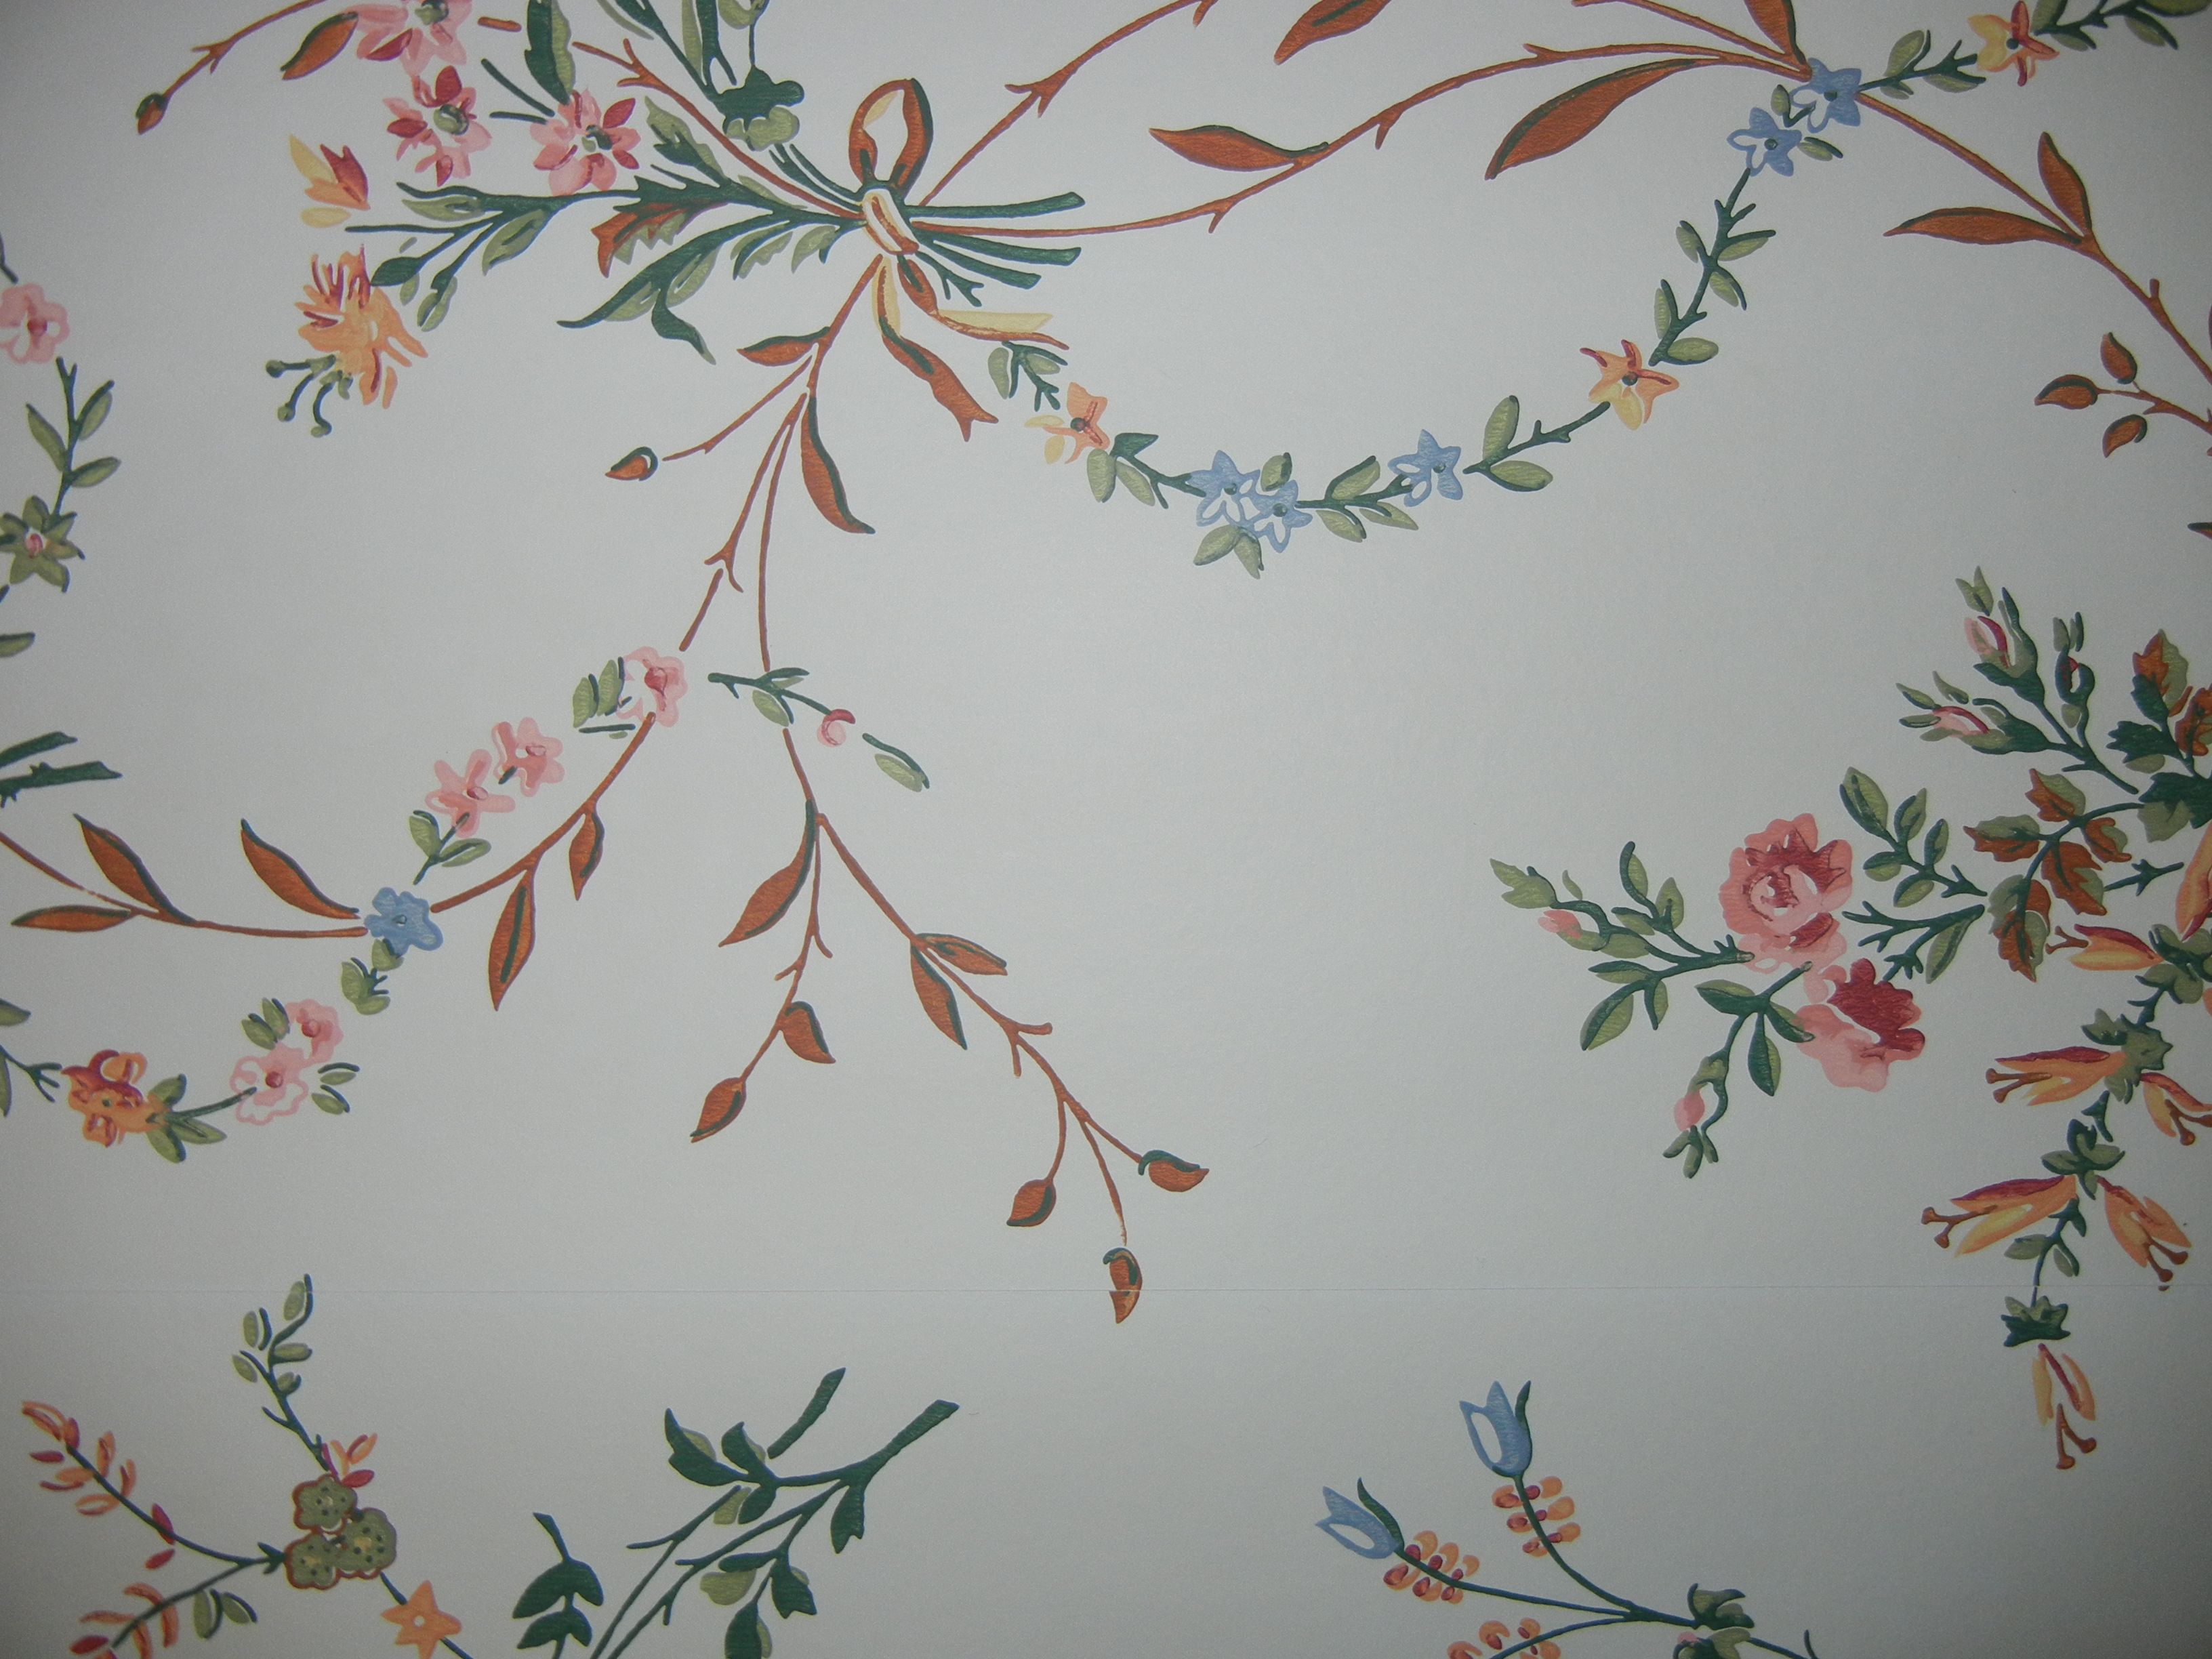 A white wall with a floral pattern of flowers and leaves painted on it. - Victorian